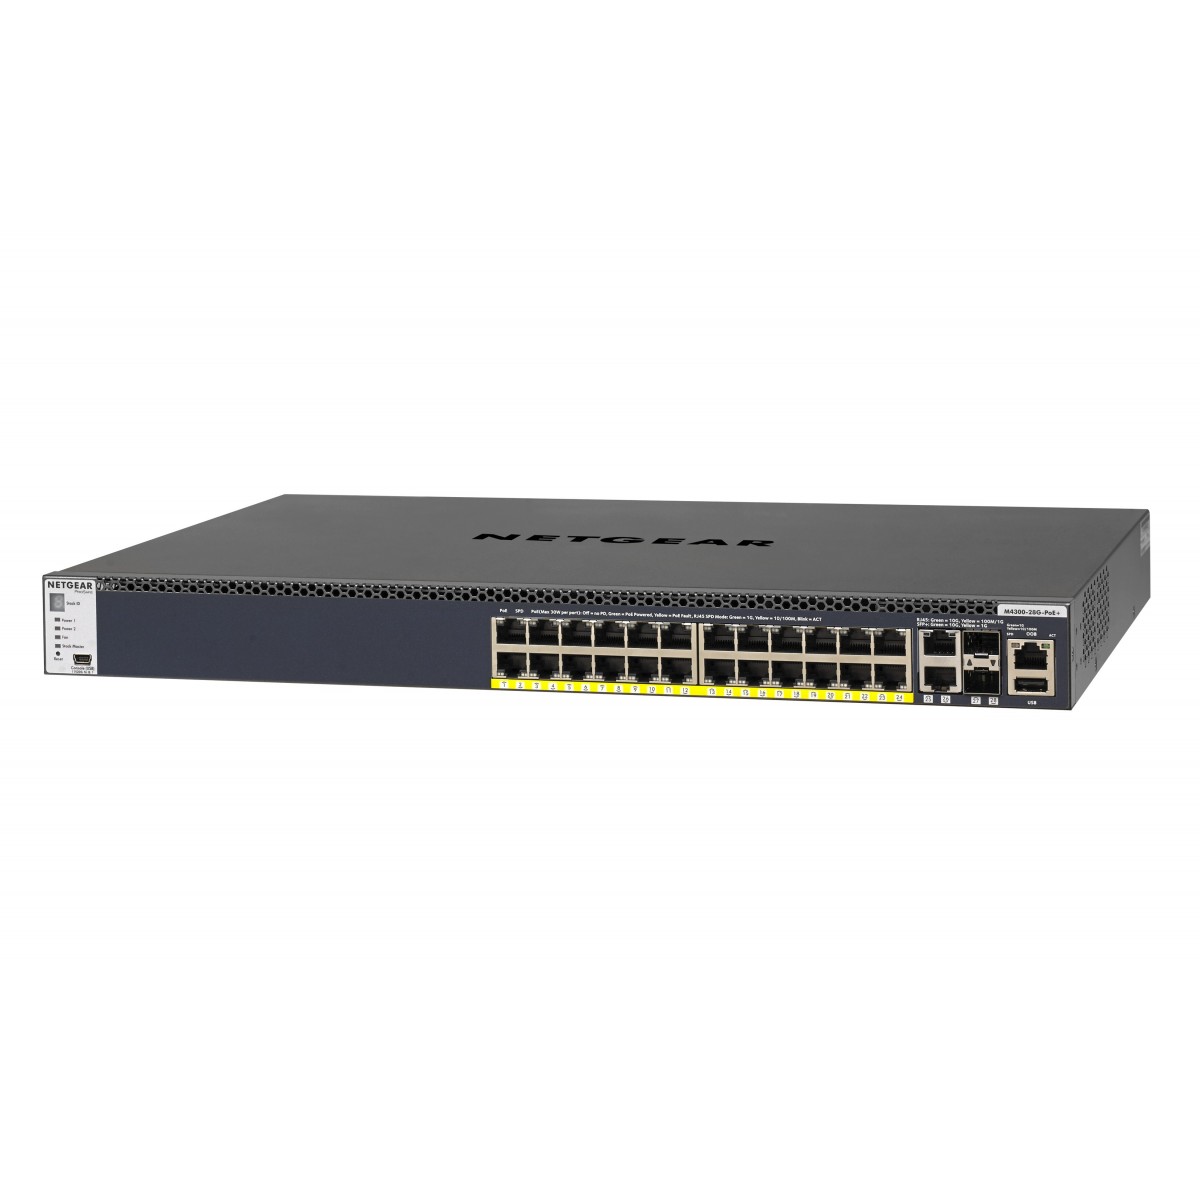 M4300-28G-PoE+ (1,000W PSU) Stackable Managed Switch with 24x1G PoE+ and 4x10G including 2x10GBASE-T and 2xSFP+ Layer 3